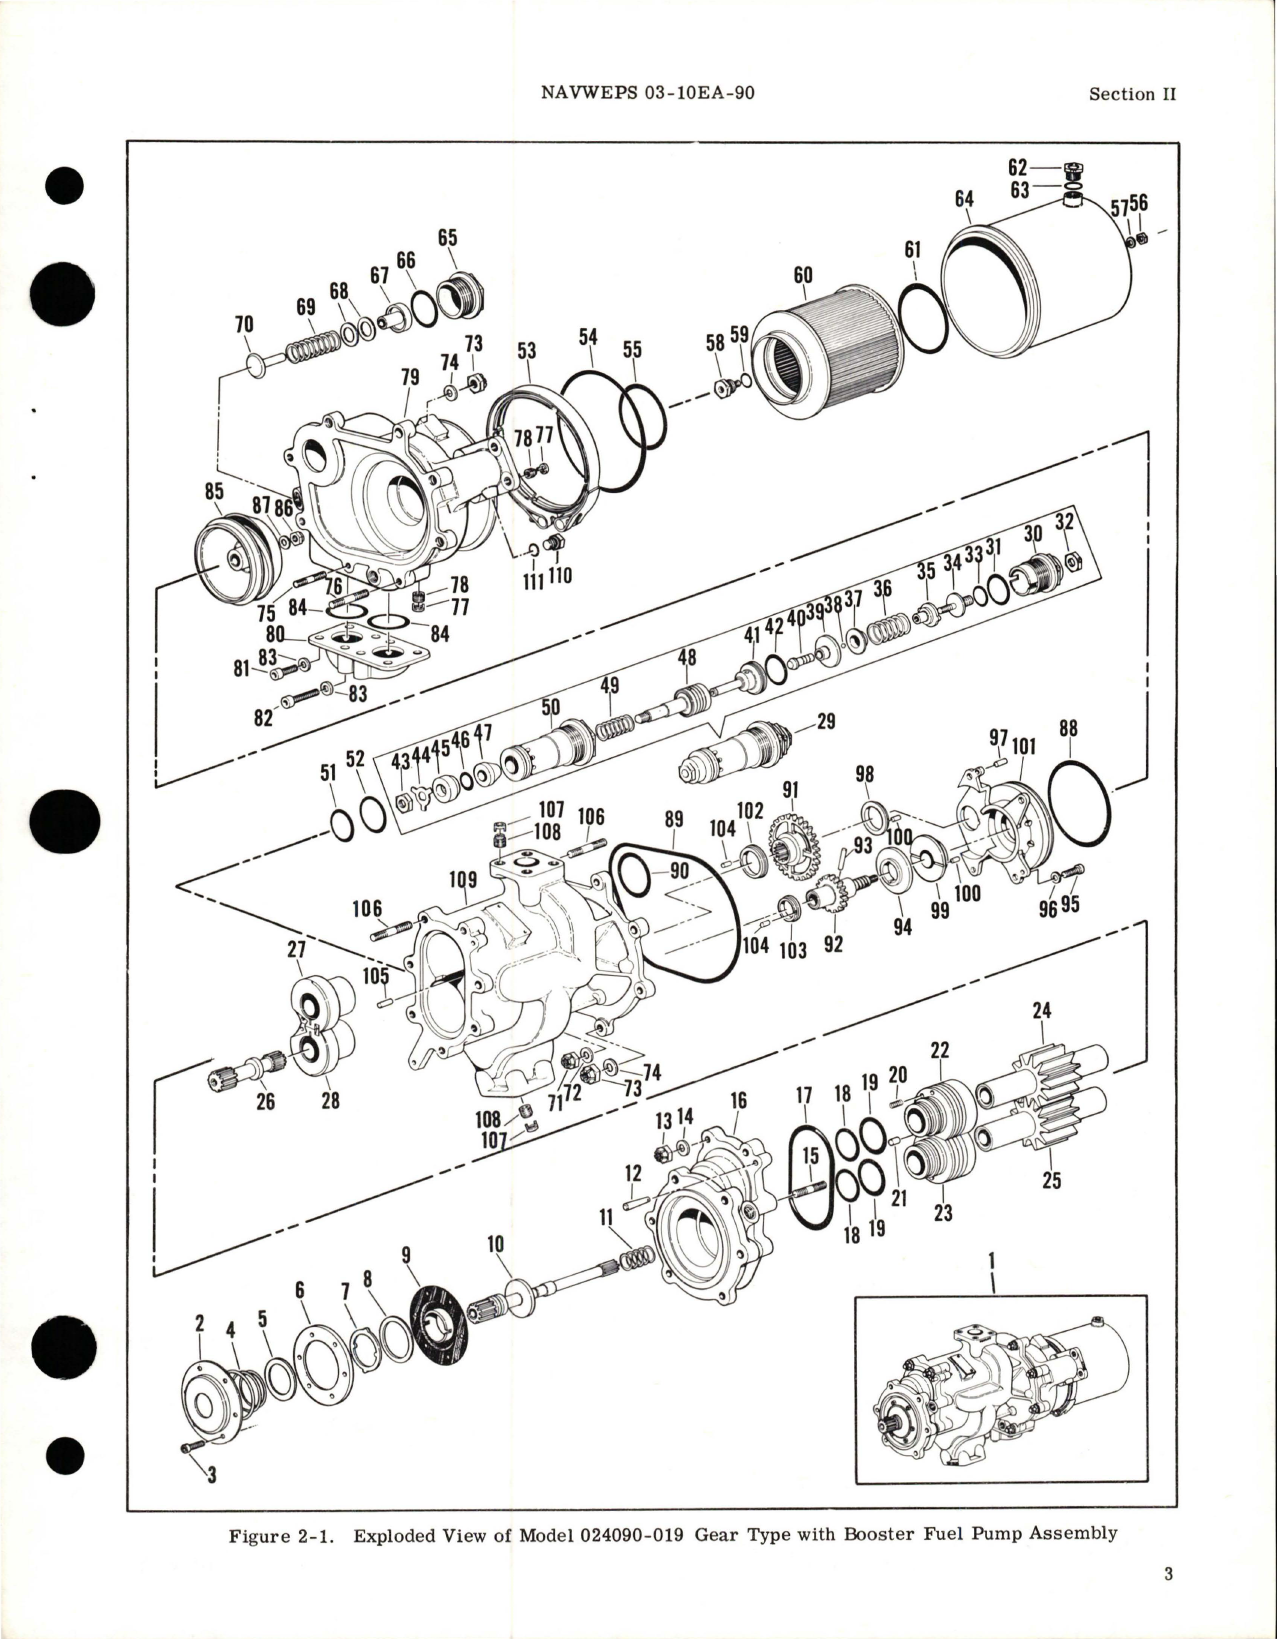 Sample page 5 from AirCorps Library document: Overhaul Instructions for Gear Type w Booster Fuel Pump Assembly - Models 024090-019 and 024090-021